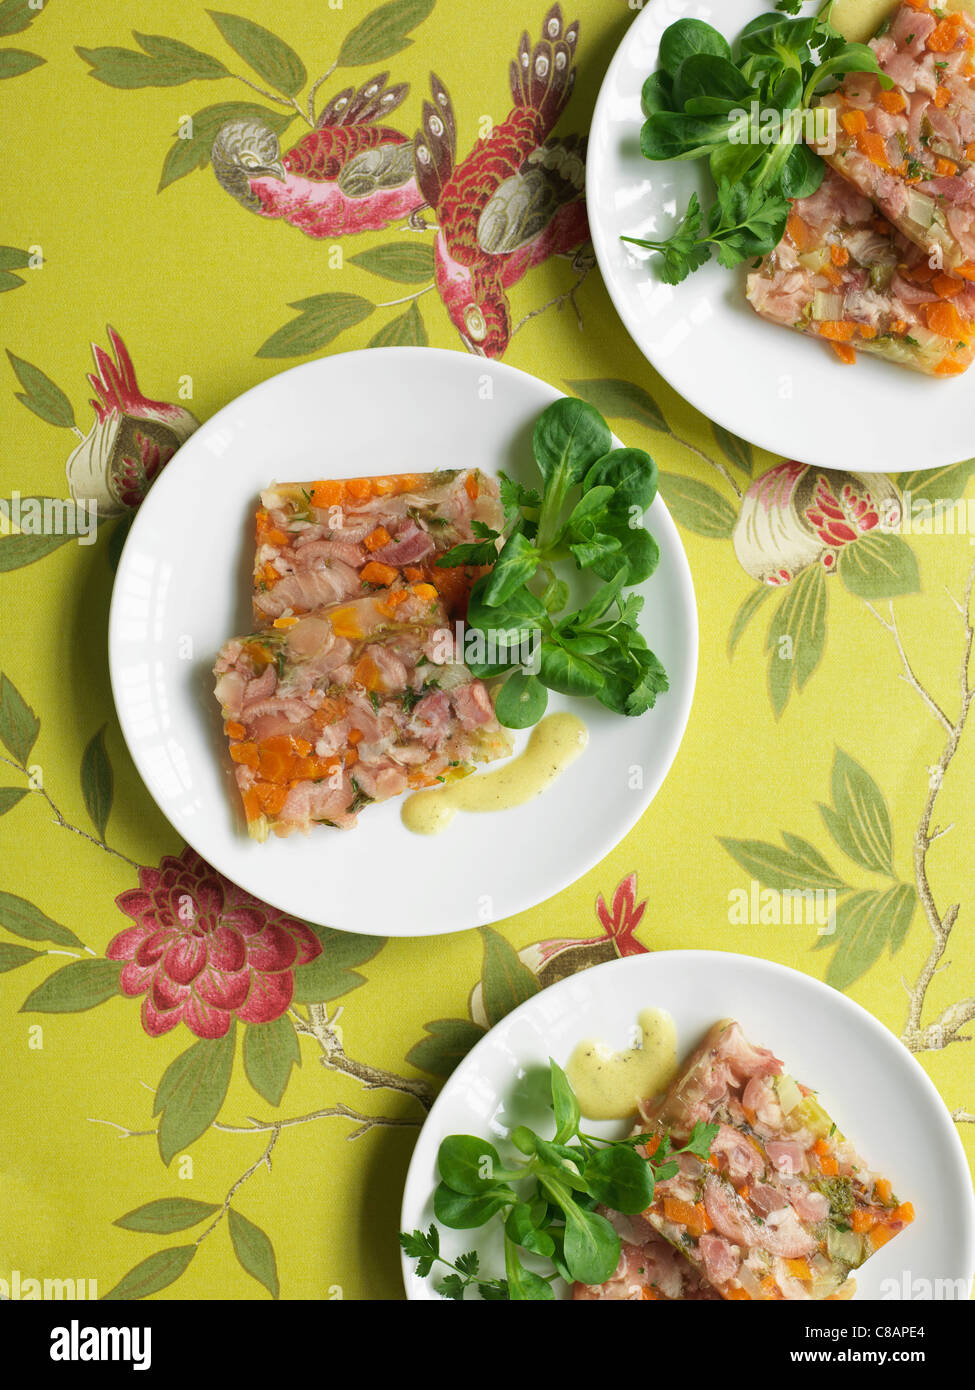 Pig's trotters,carrot and aspic terrine Stock Photo